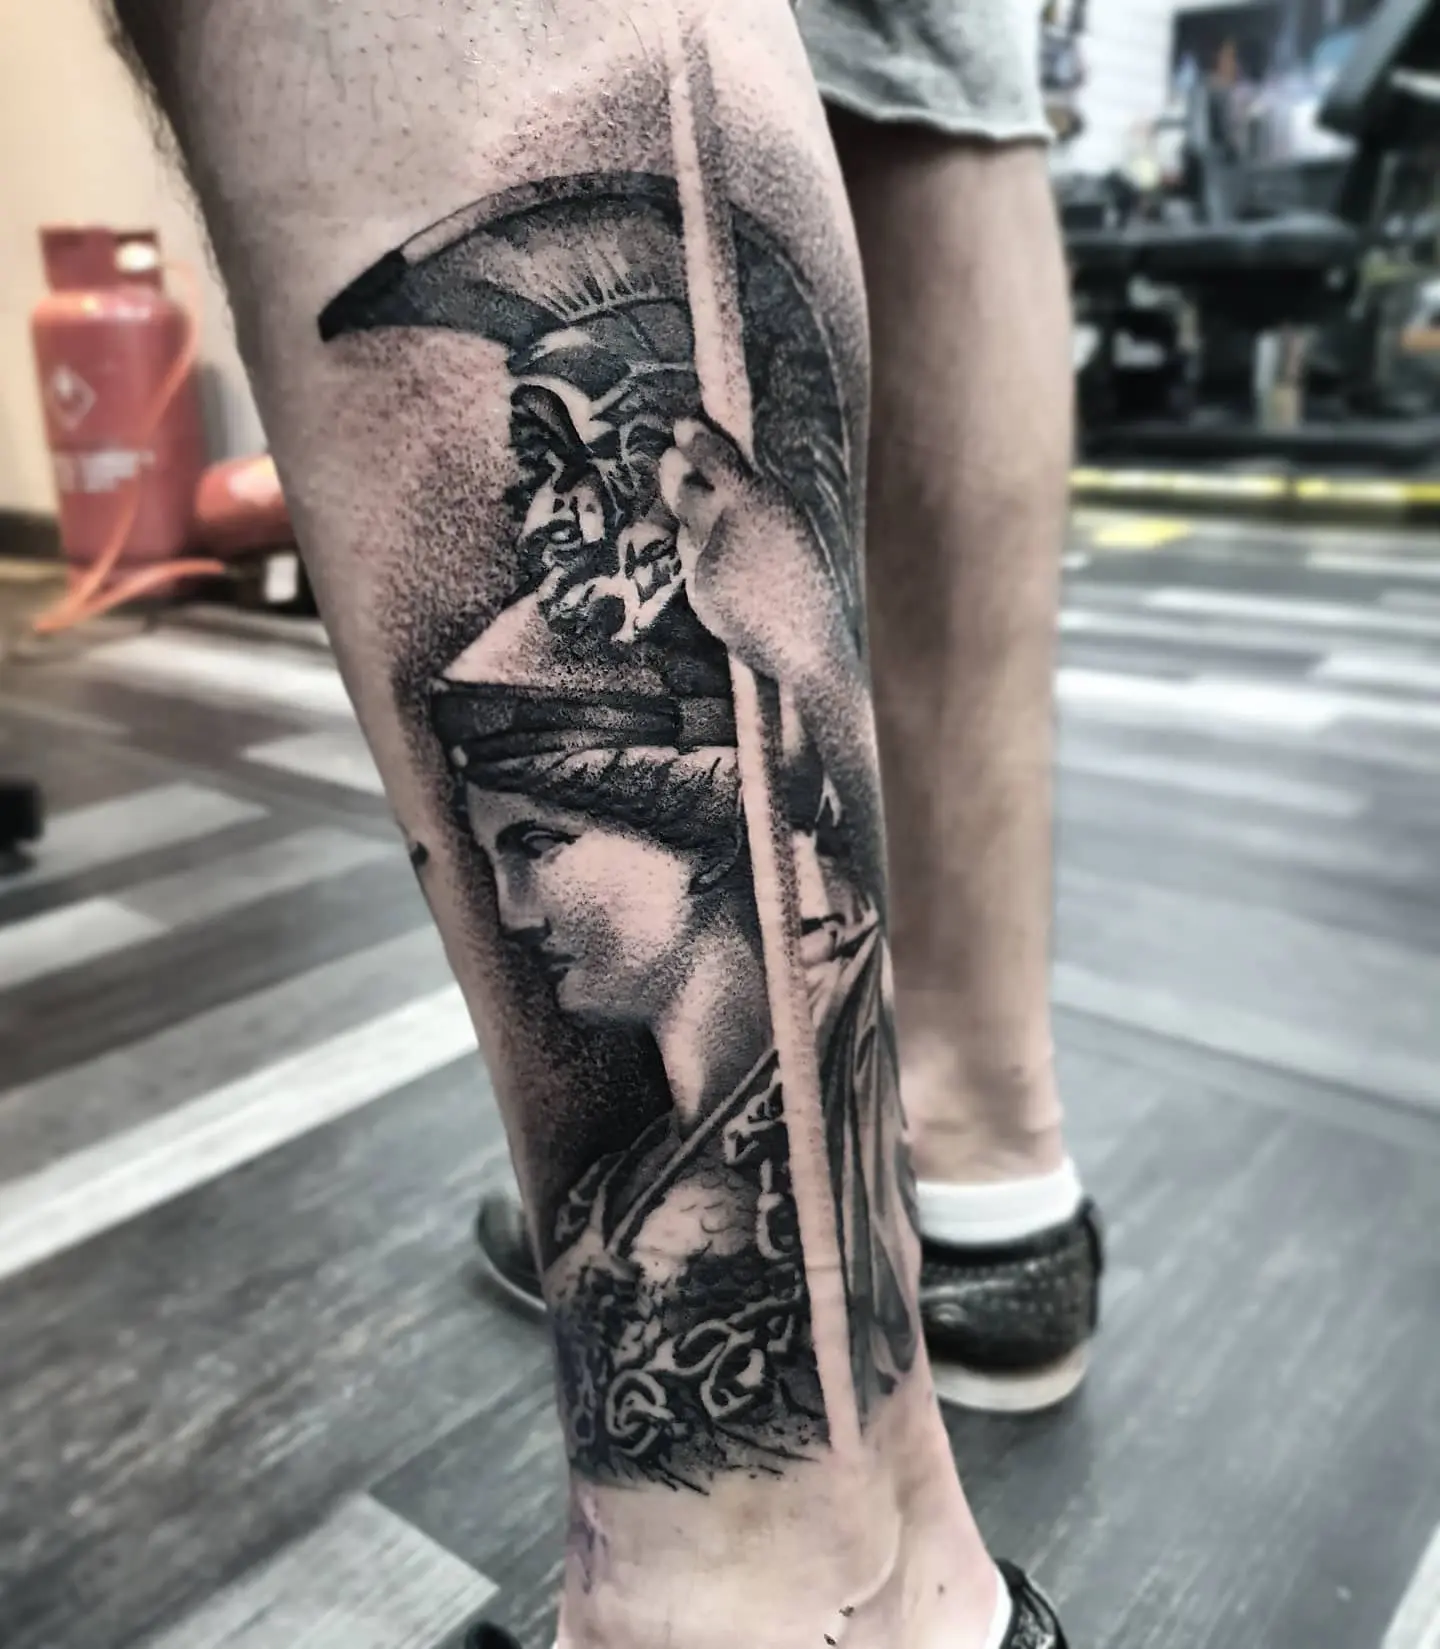 theinkelephant on Instagram Posted withrepost  blancotattoos Statue  of Liberty from an on going project